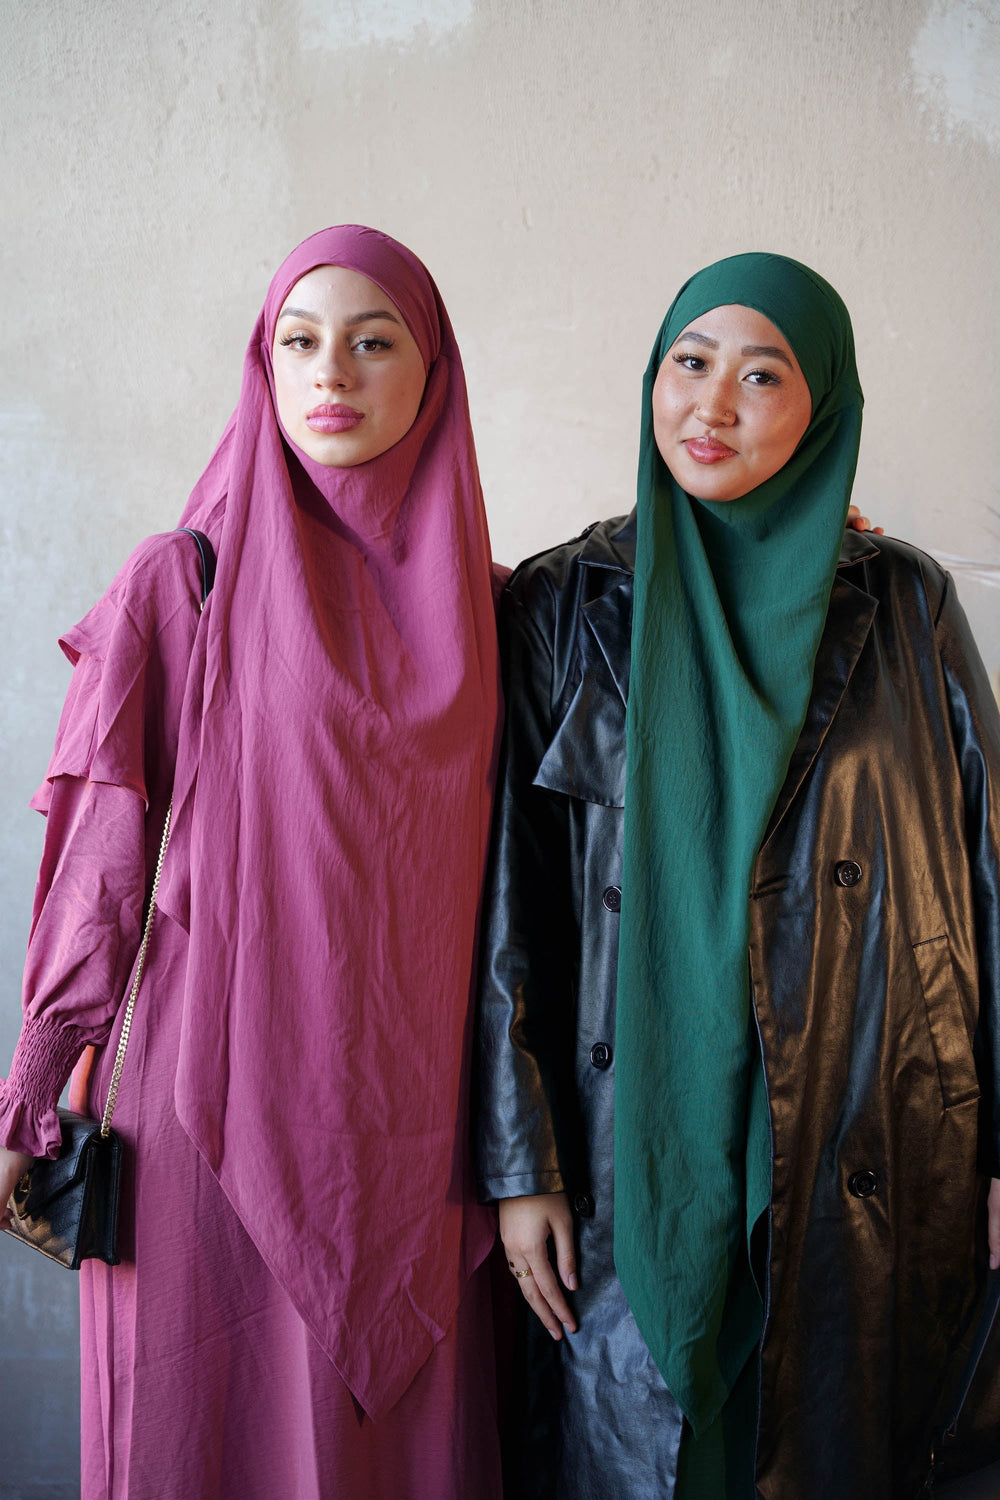 two women standing next to each other wearing headscarves